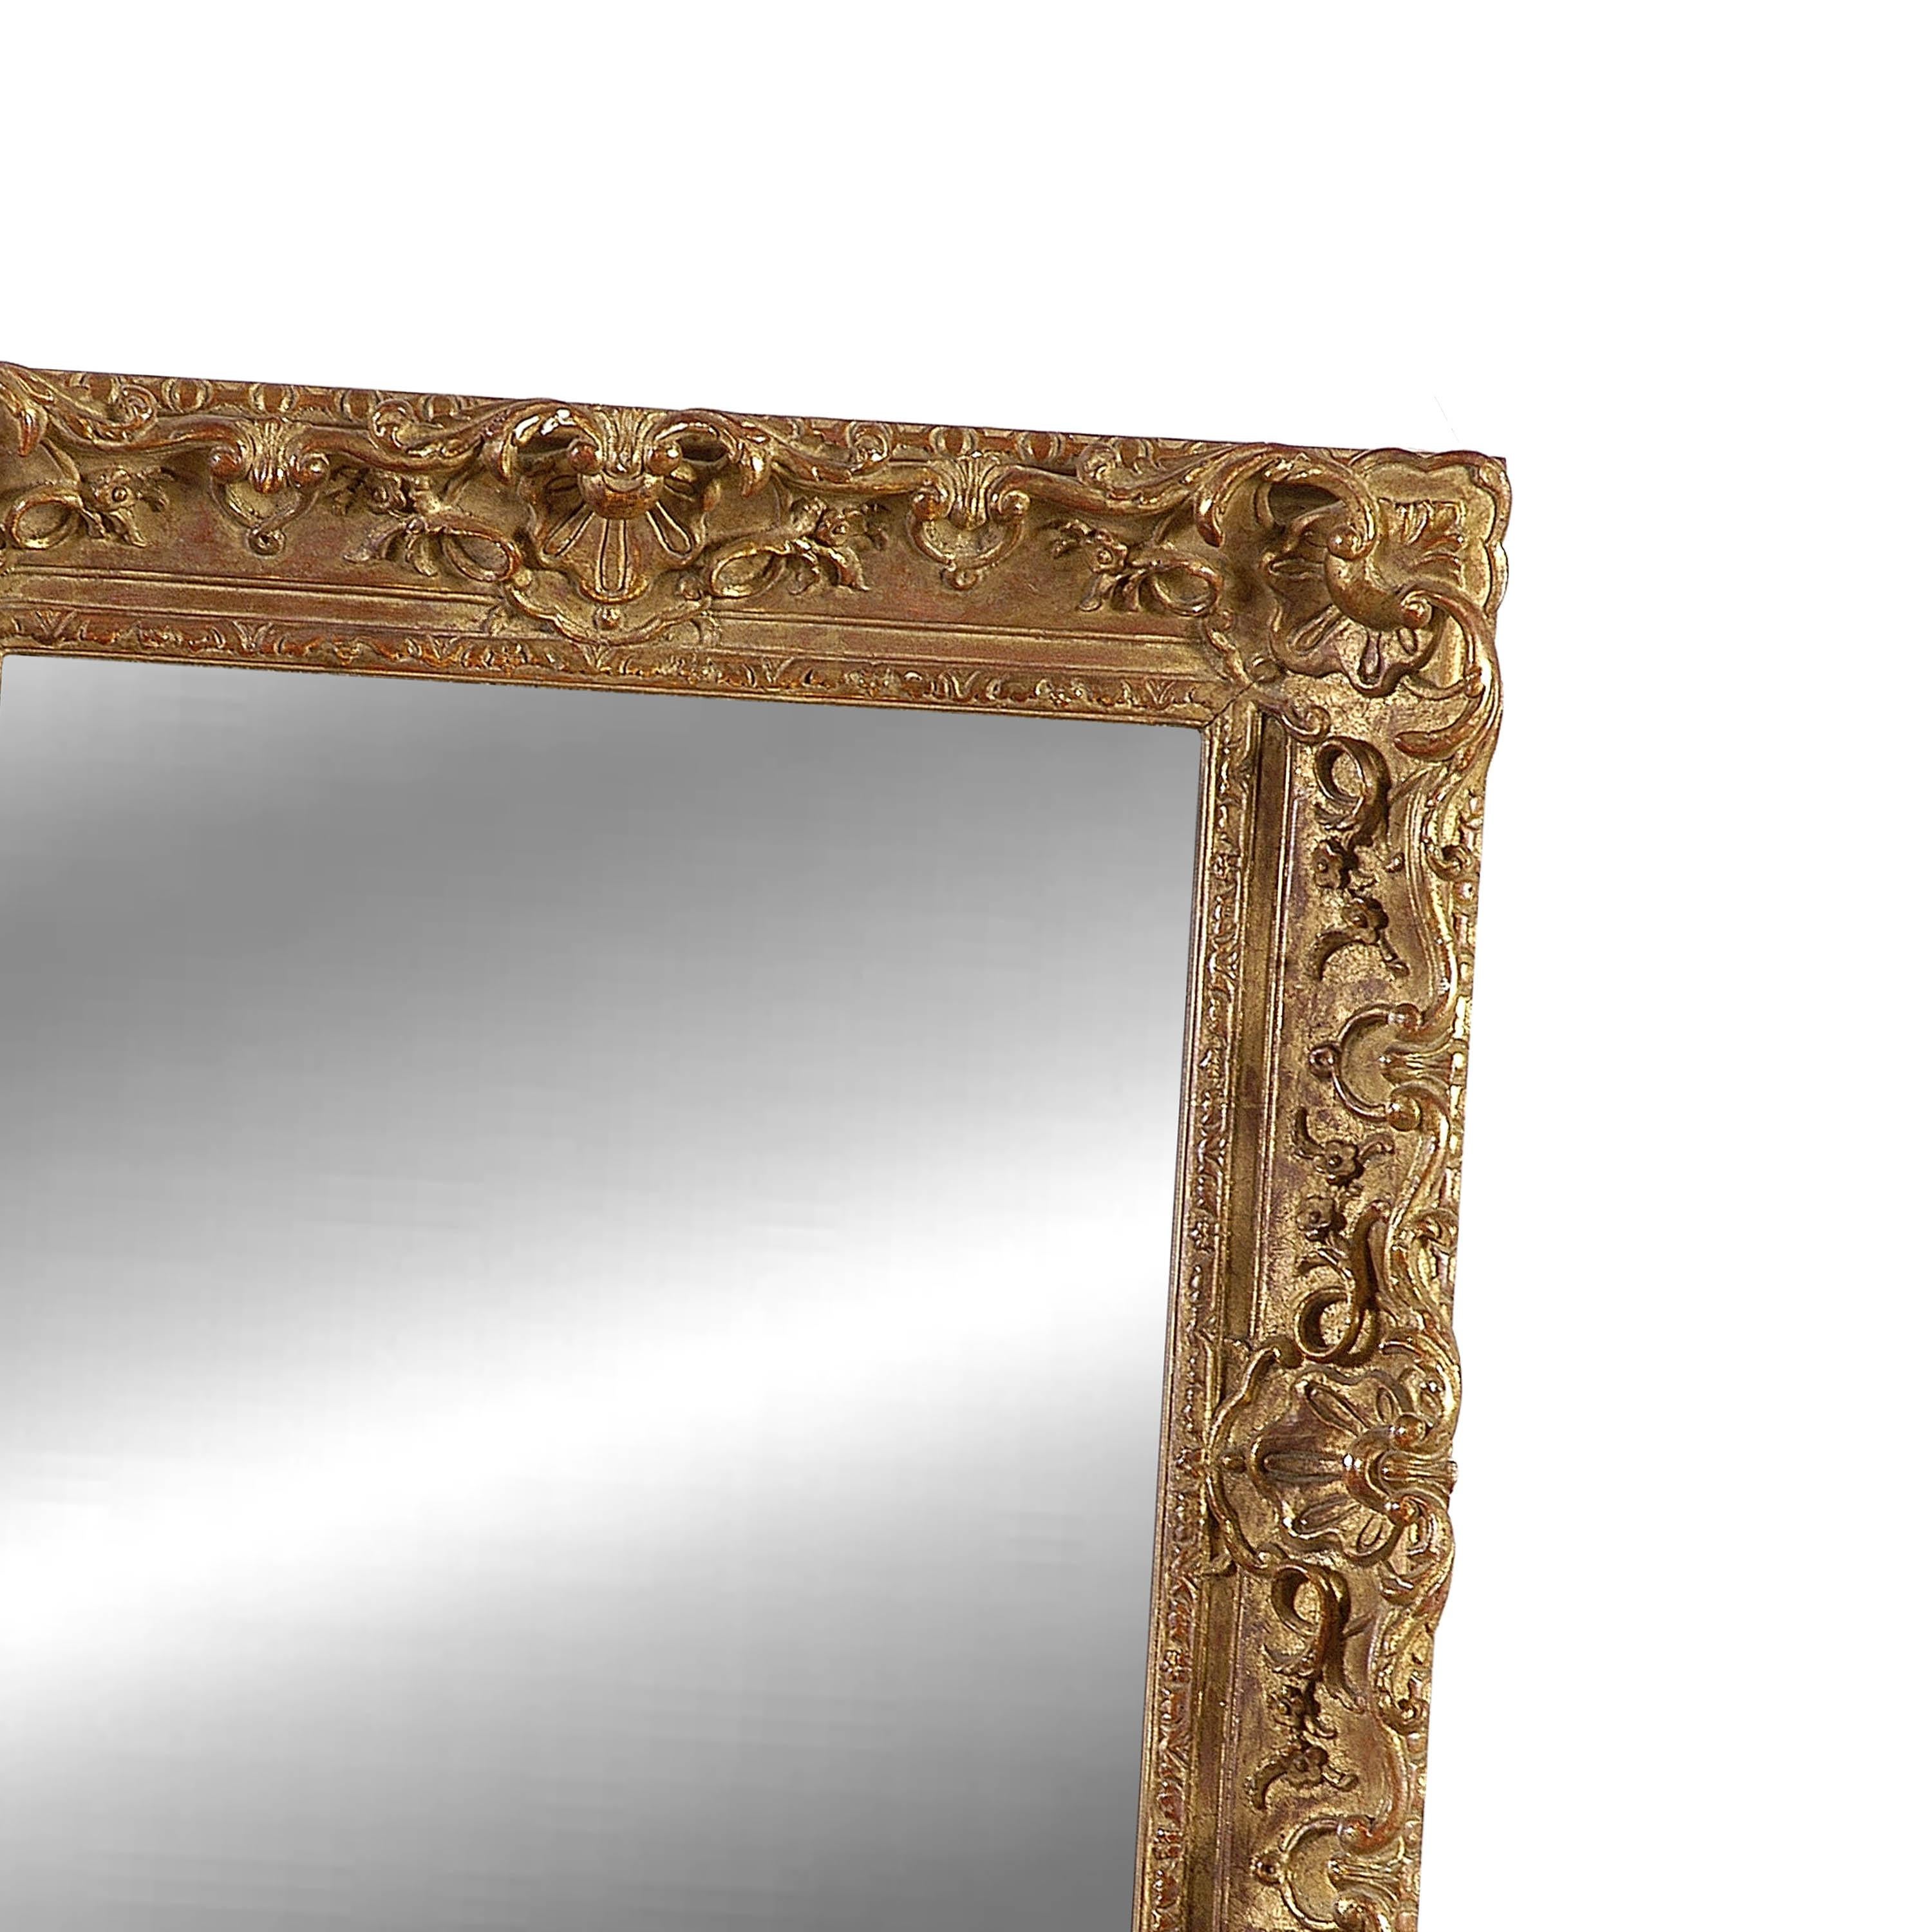 Neoclassical Empire rectangular handcrafted mirror. Rectangular hand carved wooden structure with gold foil finished. Spain, 1970.